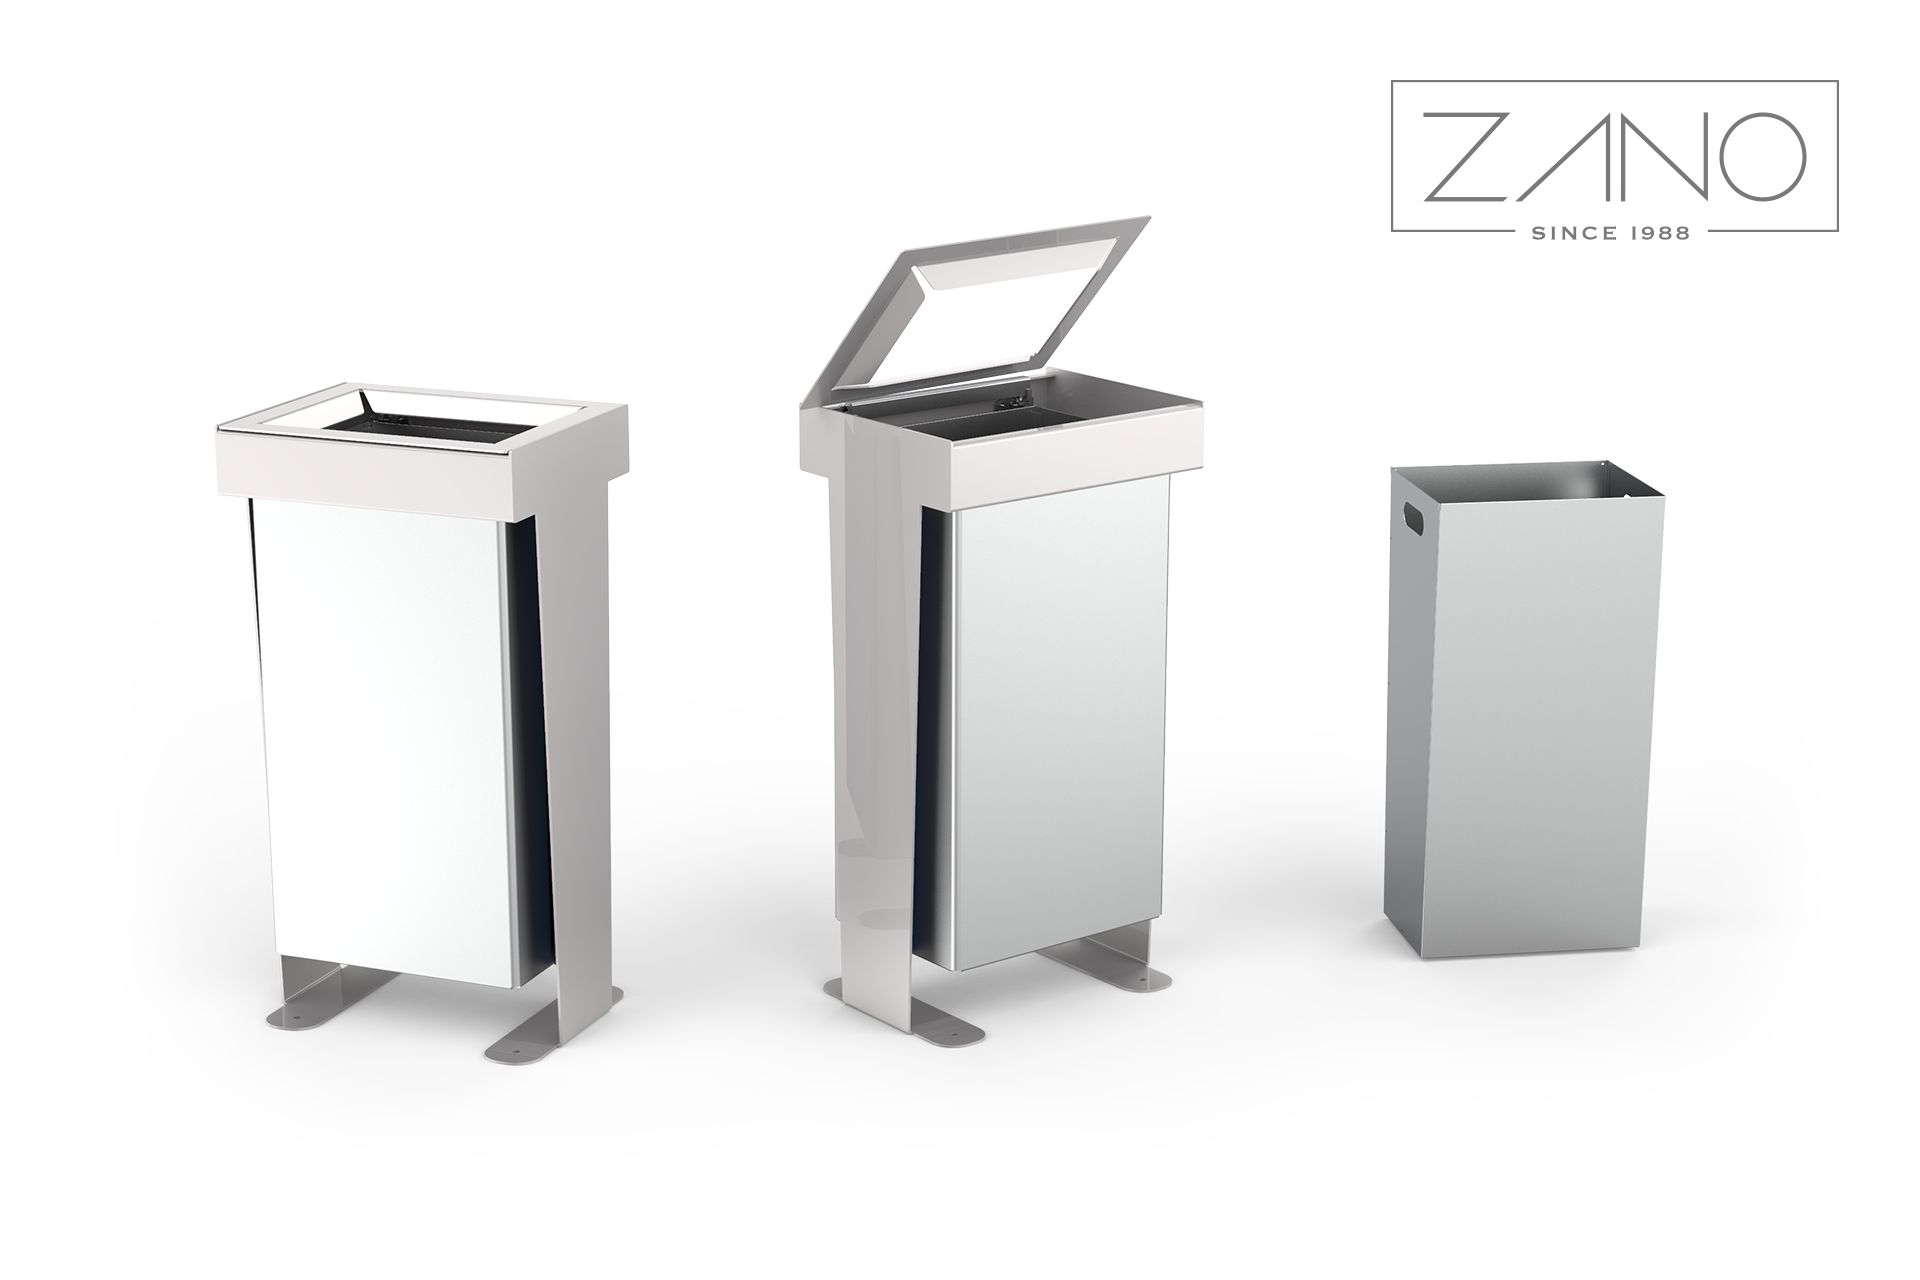 Steel dustbin with removable insert